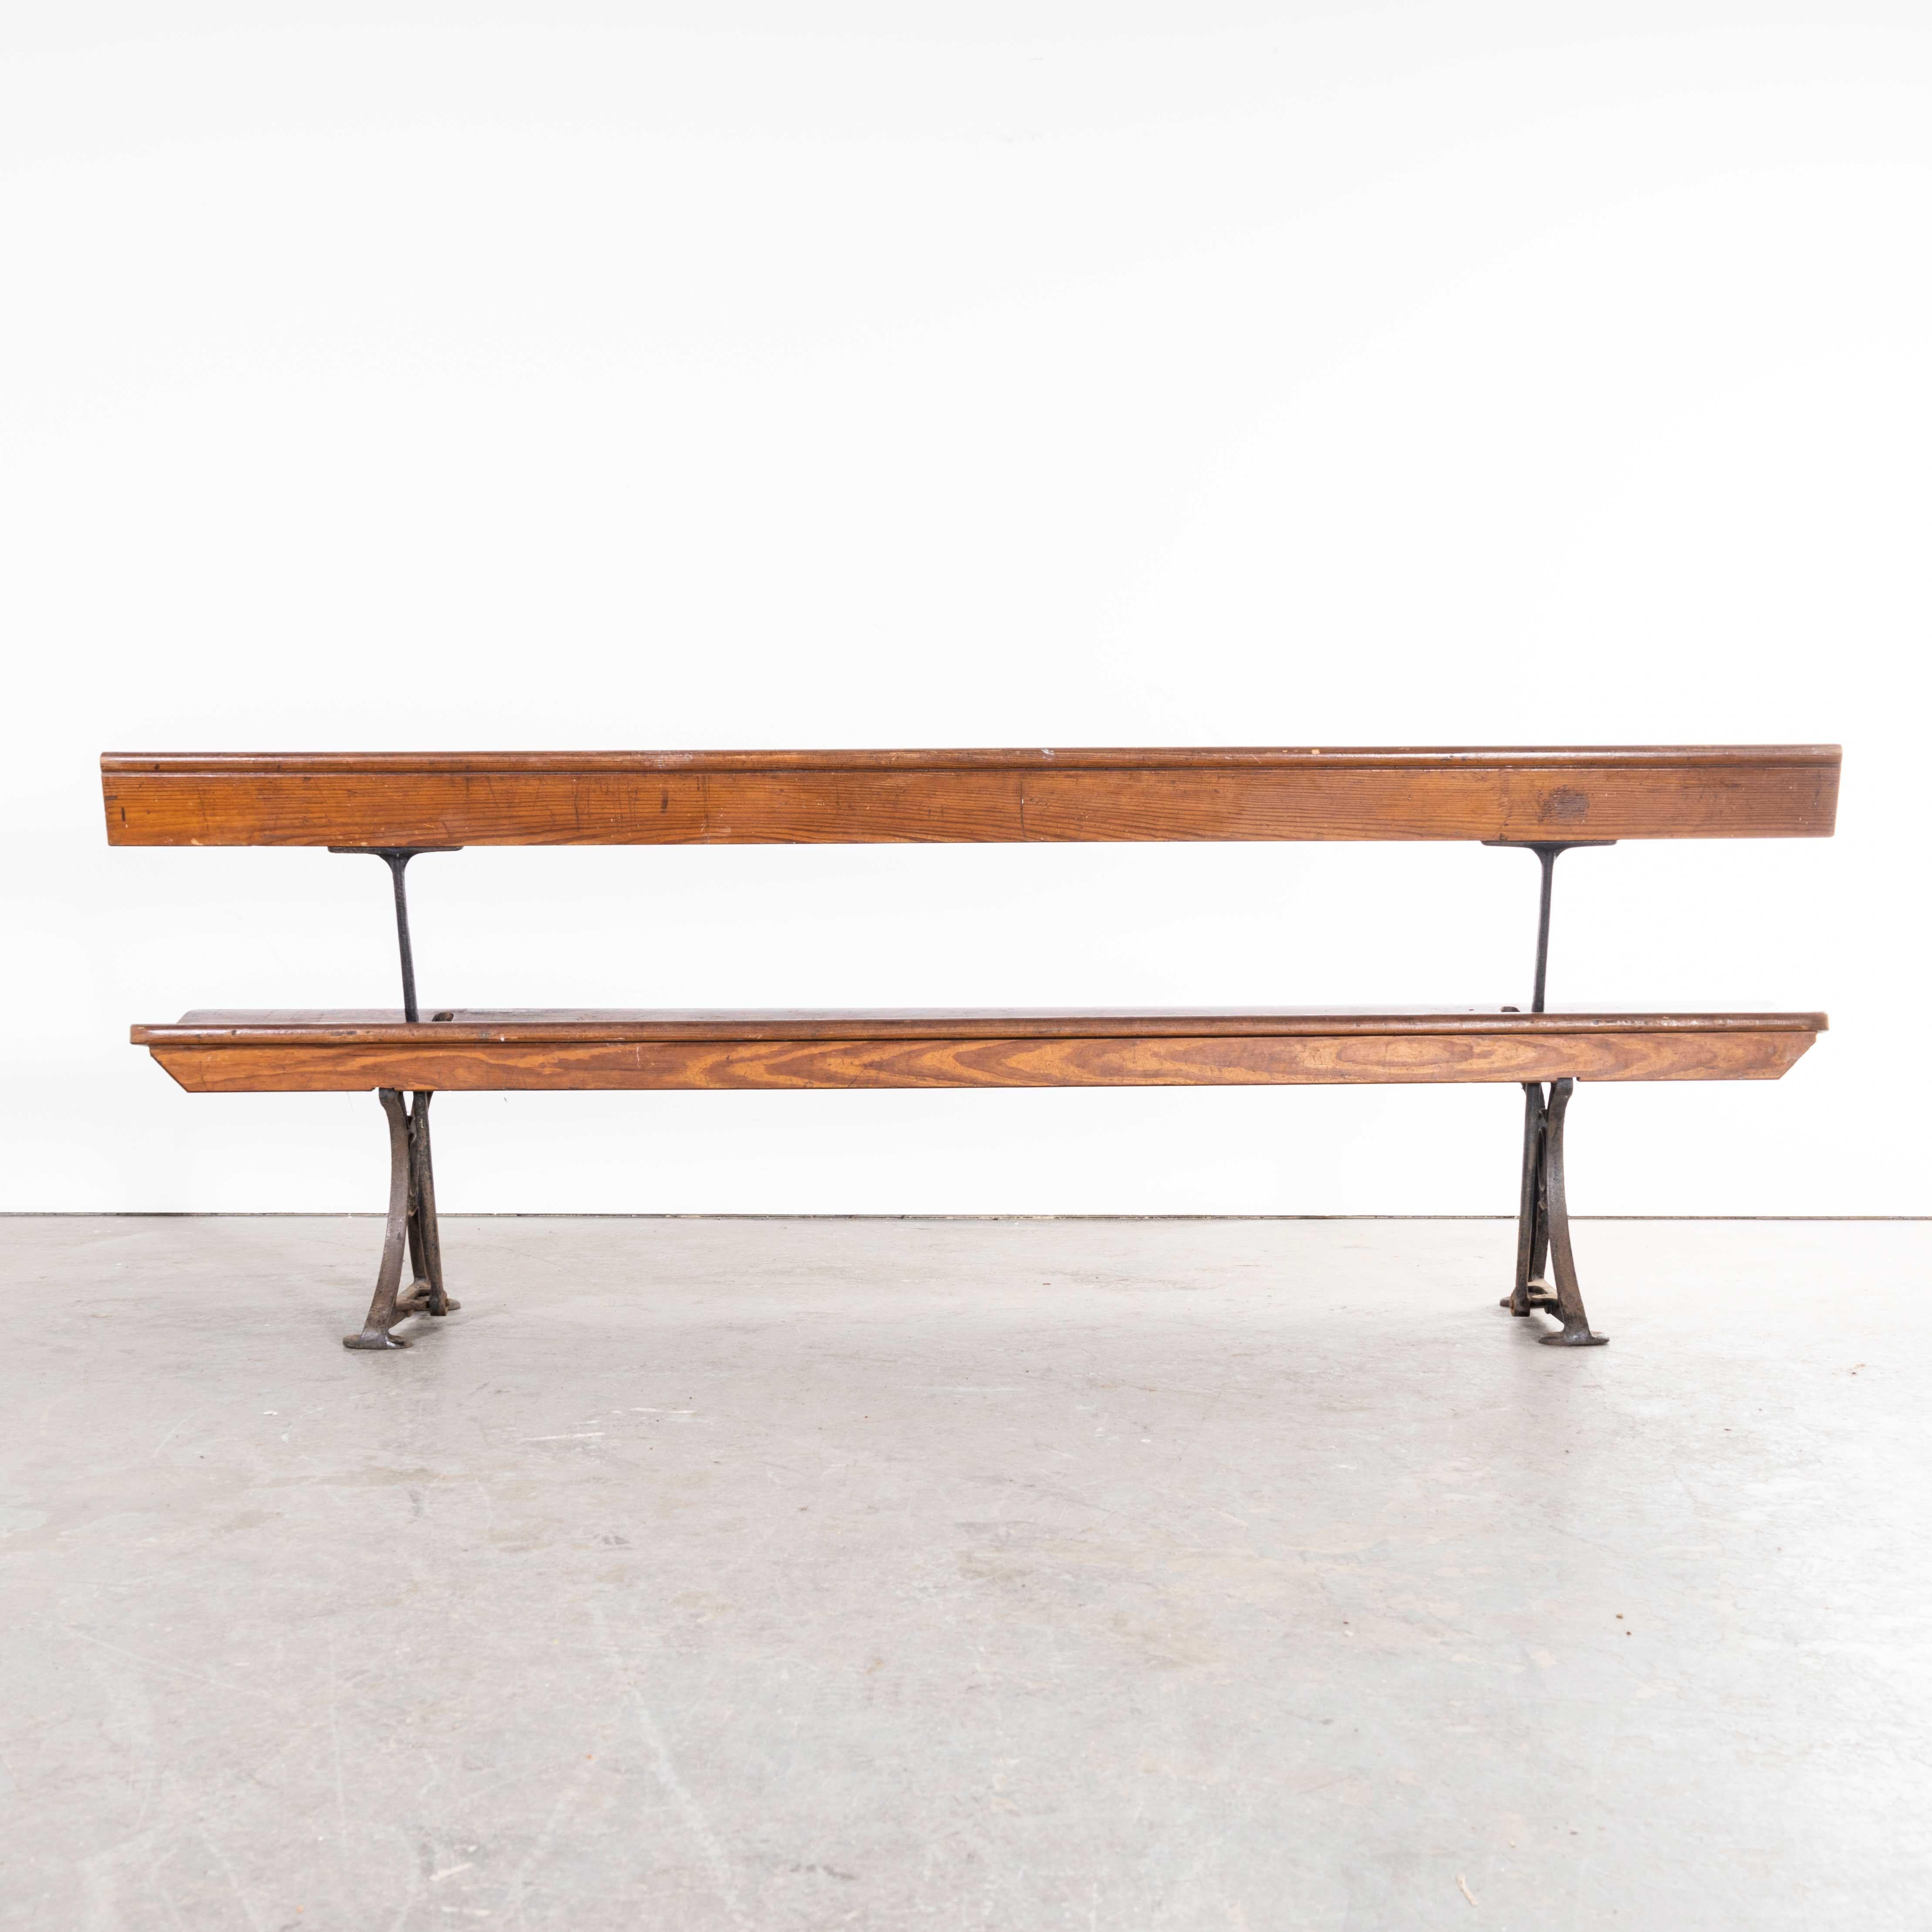 1940s Original British Station Benches – Model 2338
1940s Original British Station Benches – Model 2338. Sourced from a disused station in the midlands we have a number of these very original benches available. The benches feature heavy cast metal